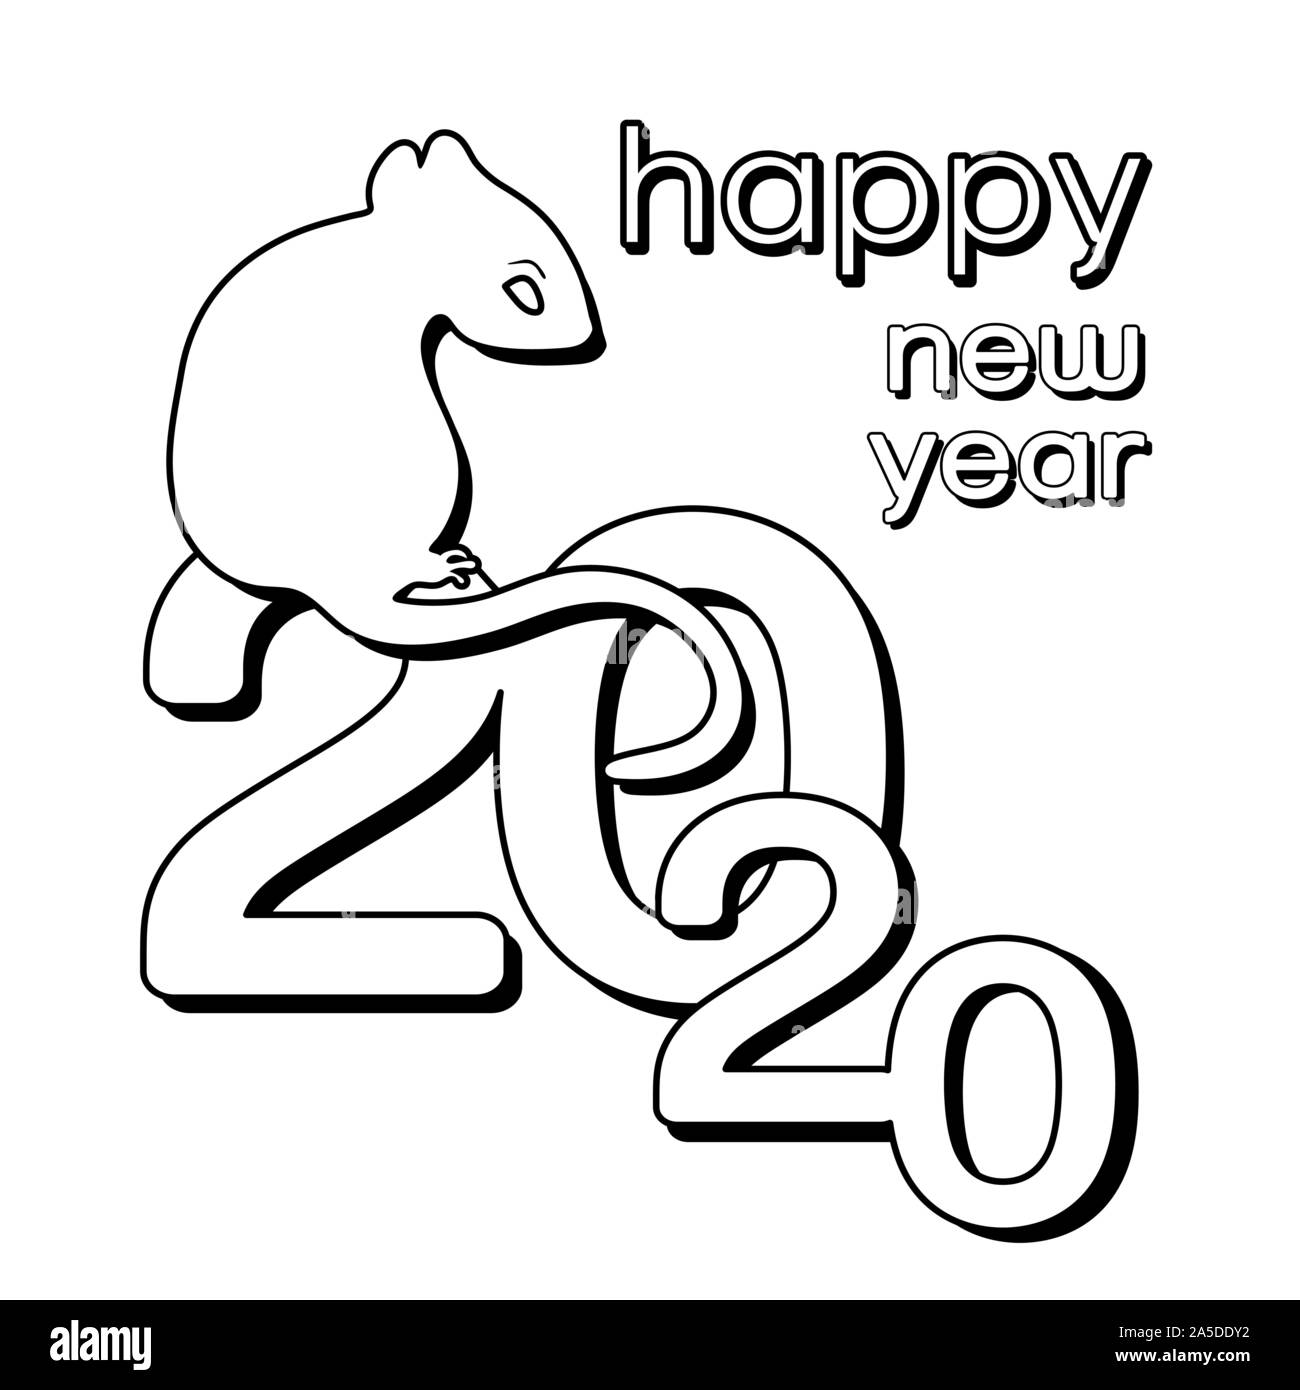 Happy New Year line logo, card , 2020 outline icon, silhouette, symbol of the year according to the eastern Chinese calendar, vector illustration. Bla Stock Vector